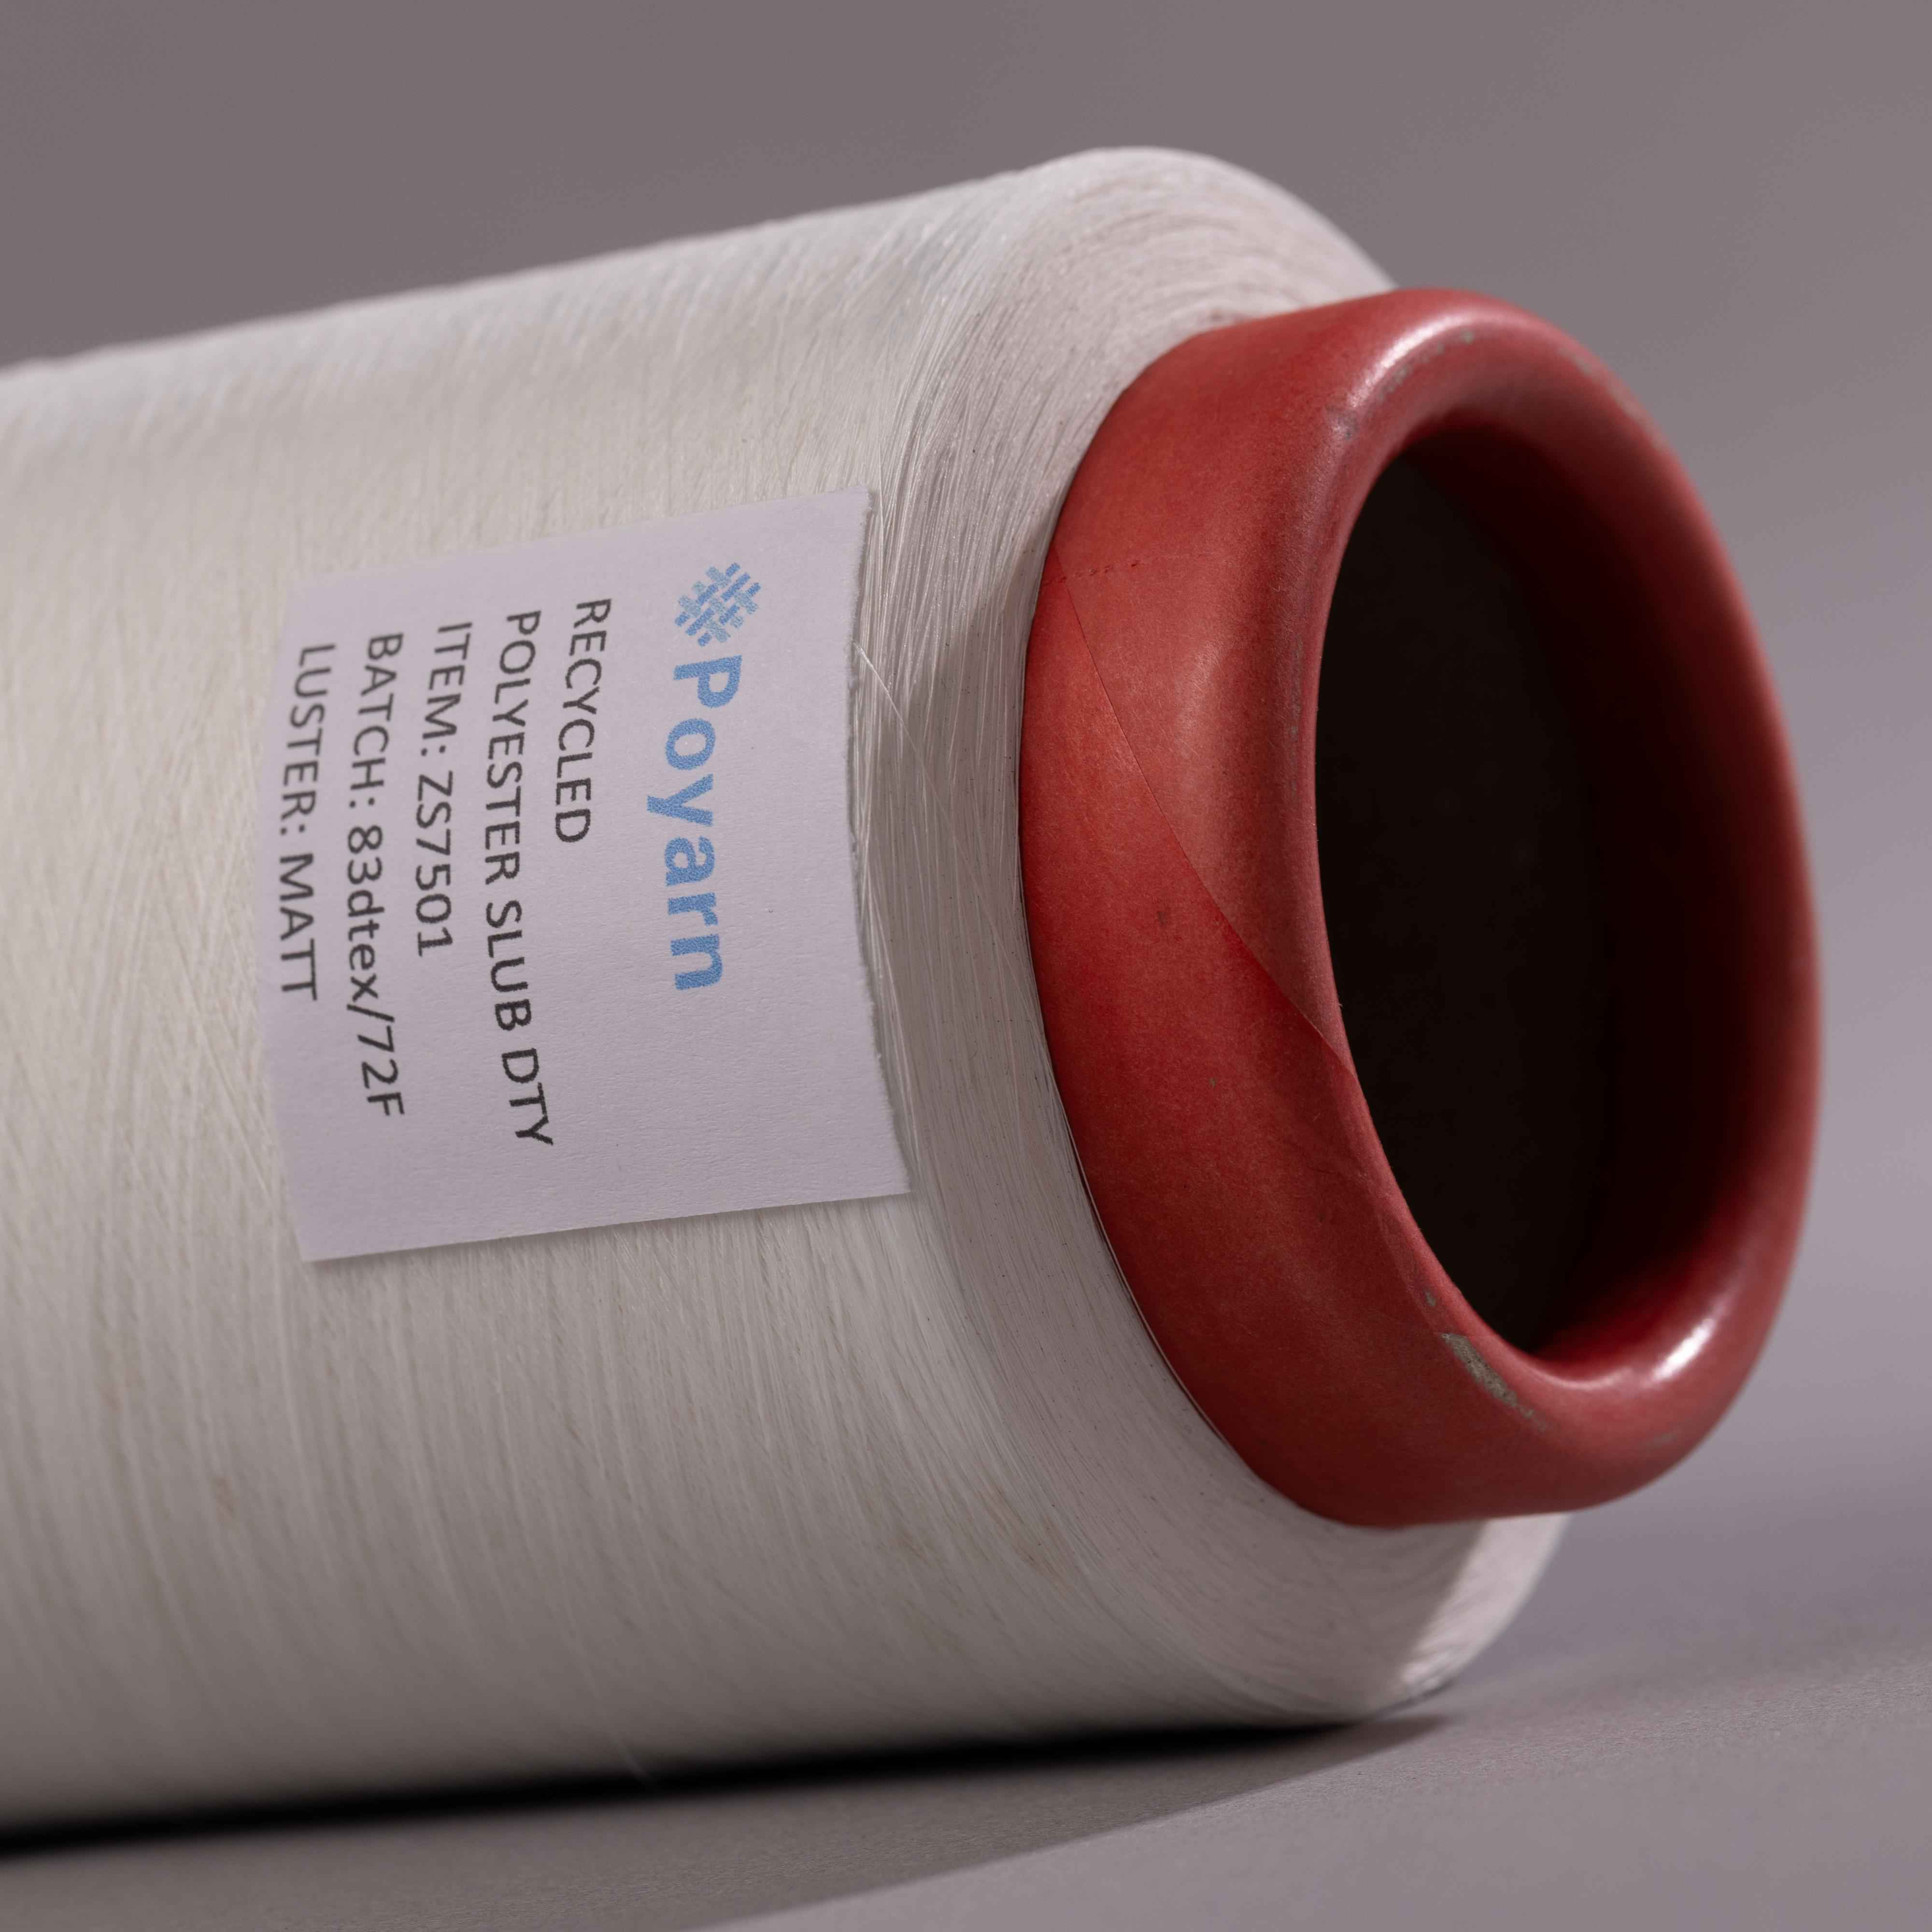 Recycled Polyester Yarn: Source, Advantages, and Applications